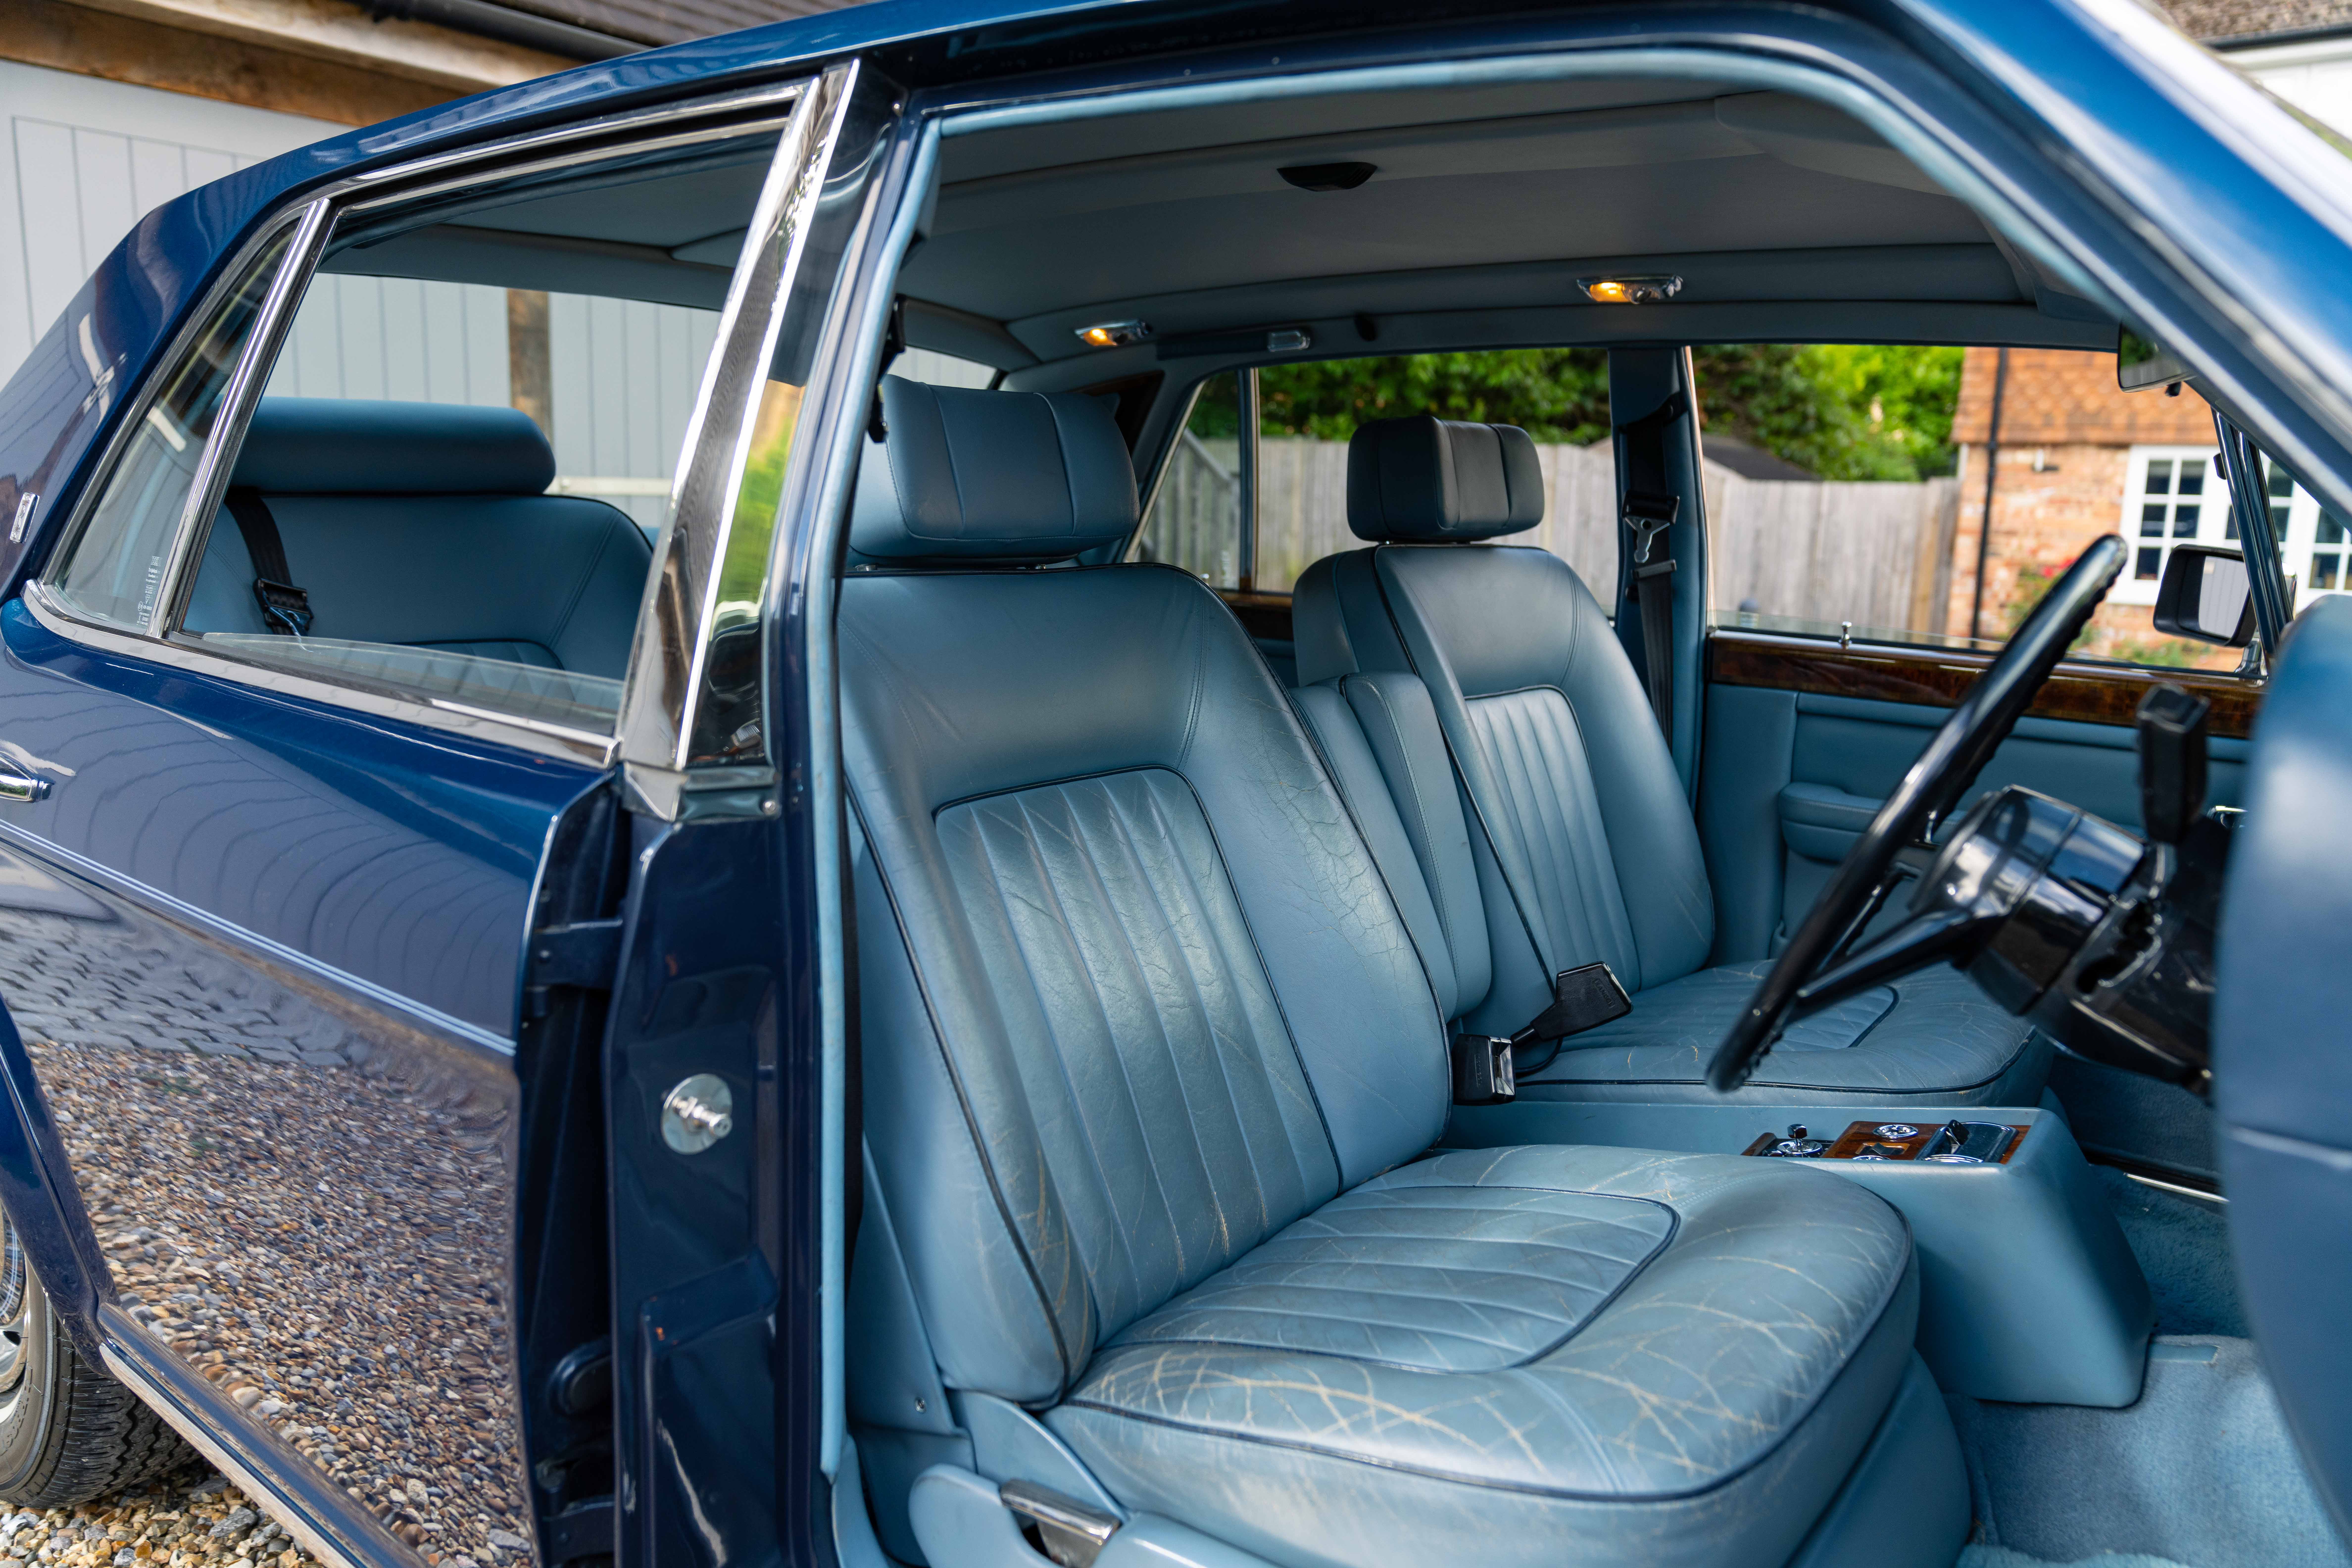 1985 ROLLSROYCE SILVER SPIRIT for sale by auction in Ascot Berkshire  United Kingdom